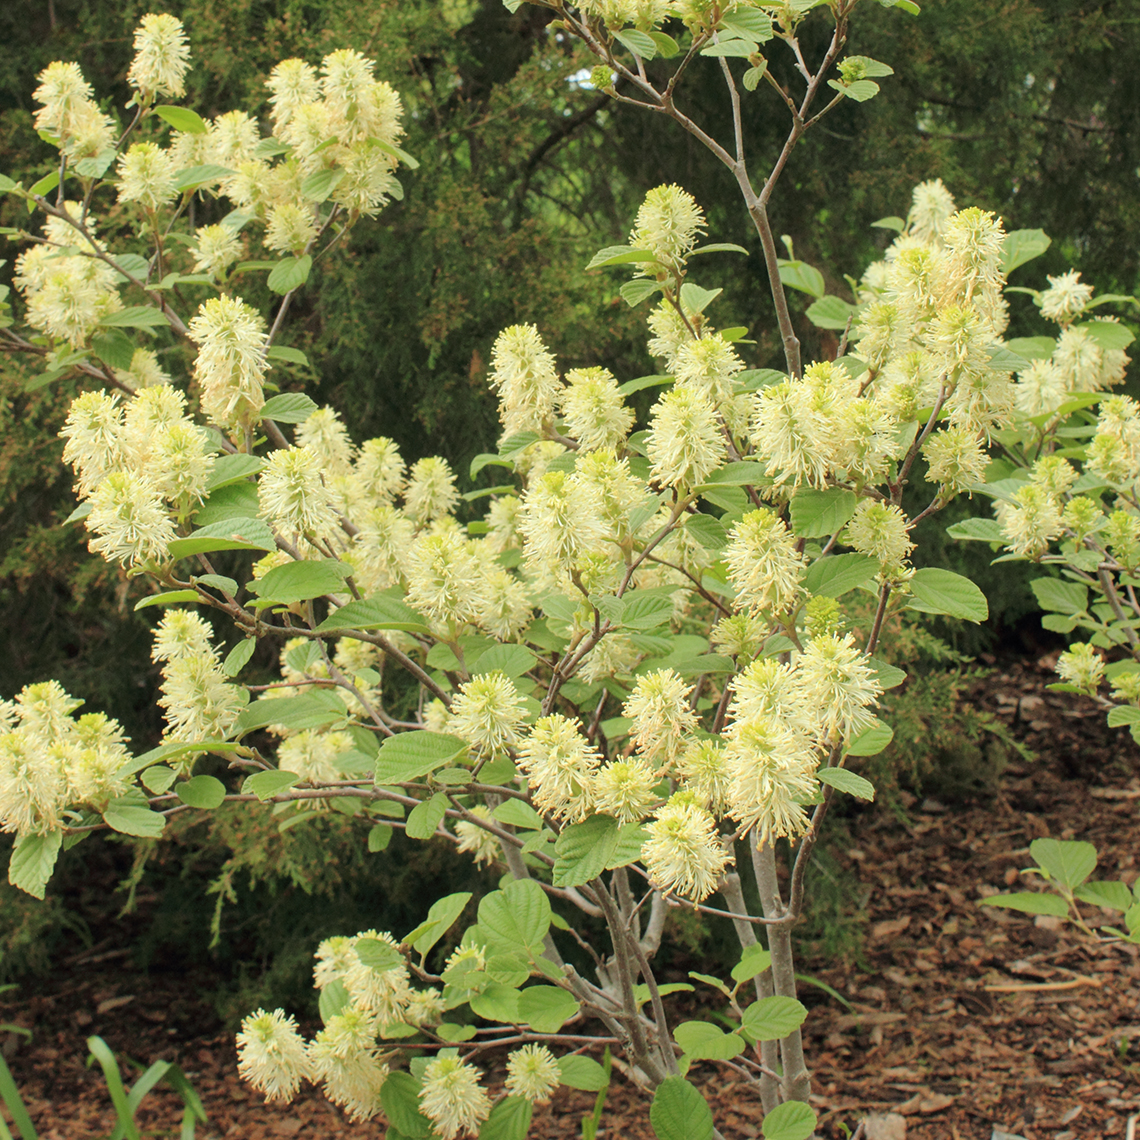 Fothergilla gardenii blooming in a bed of mulch